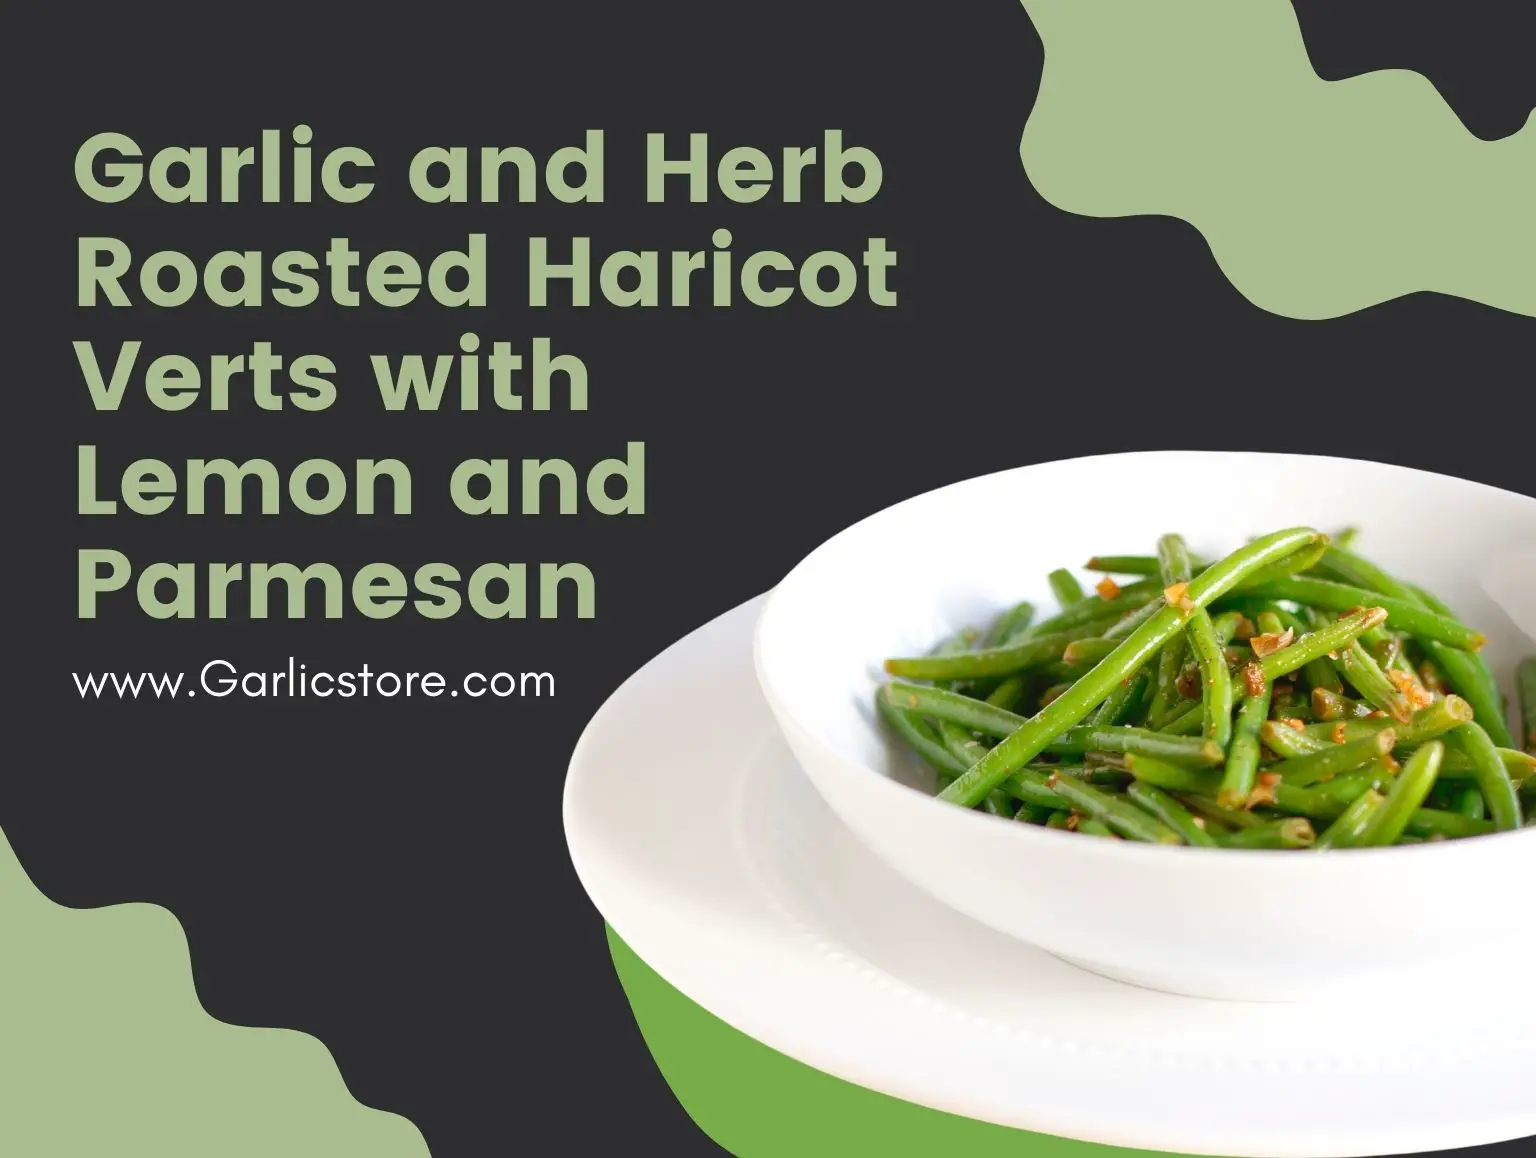 Garlic and Herb Roasted Haricot Verts with Lemon and Parmesan